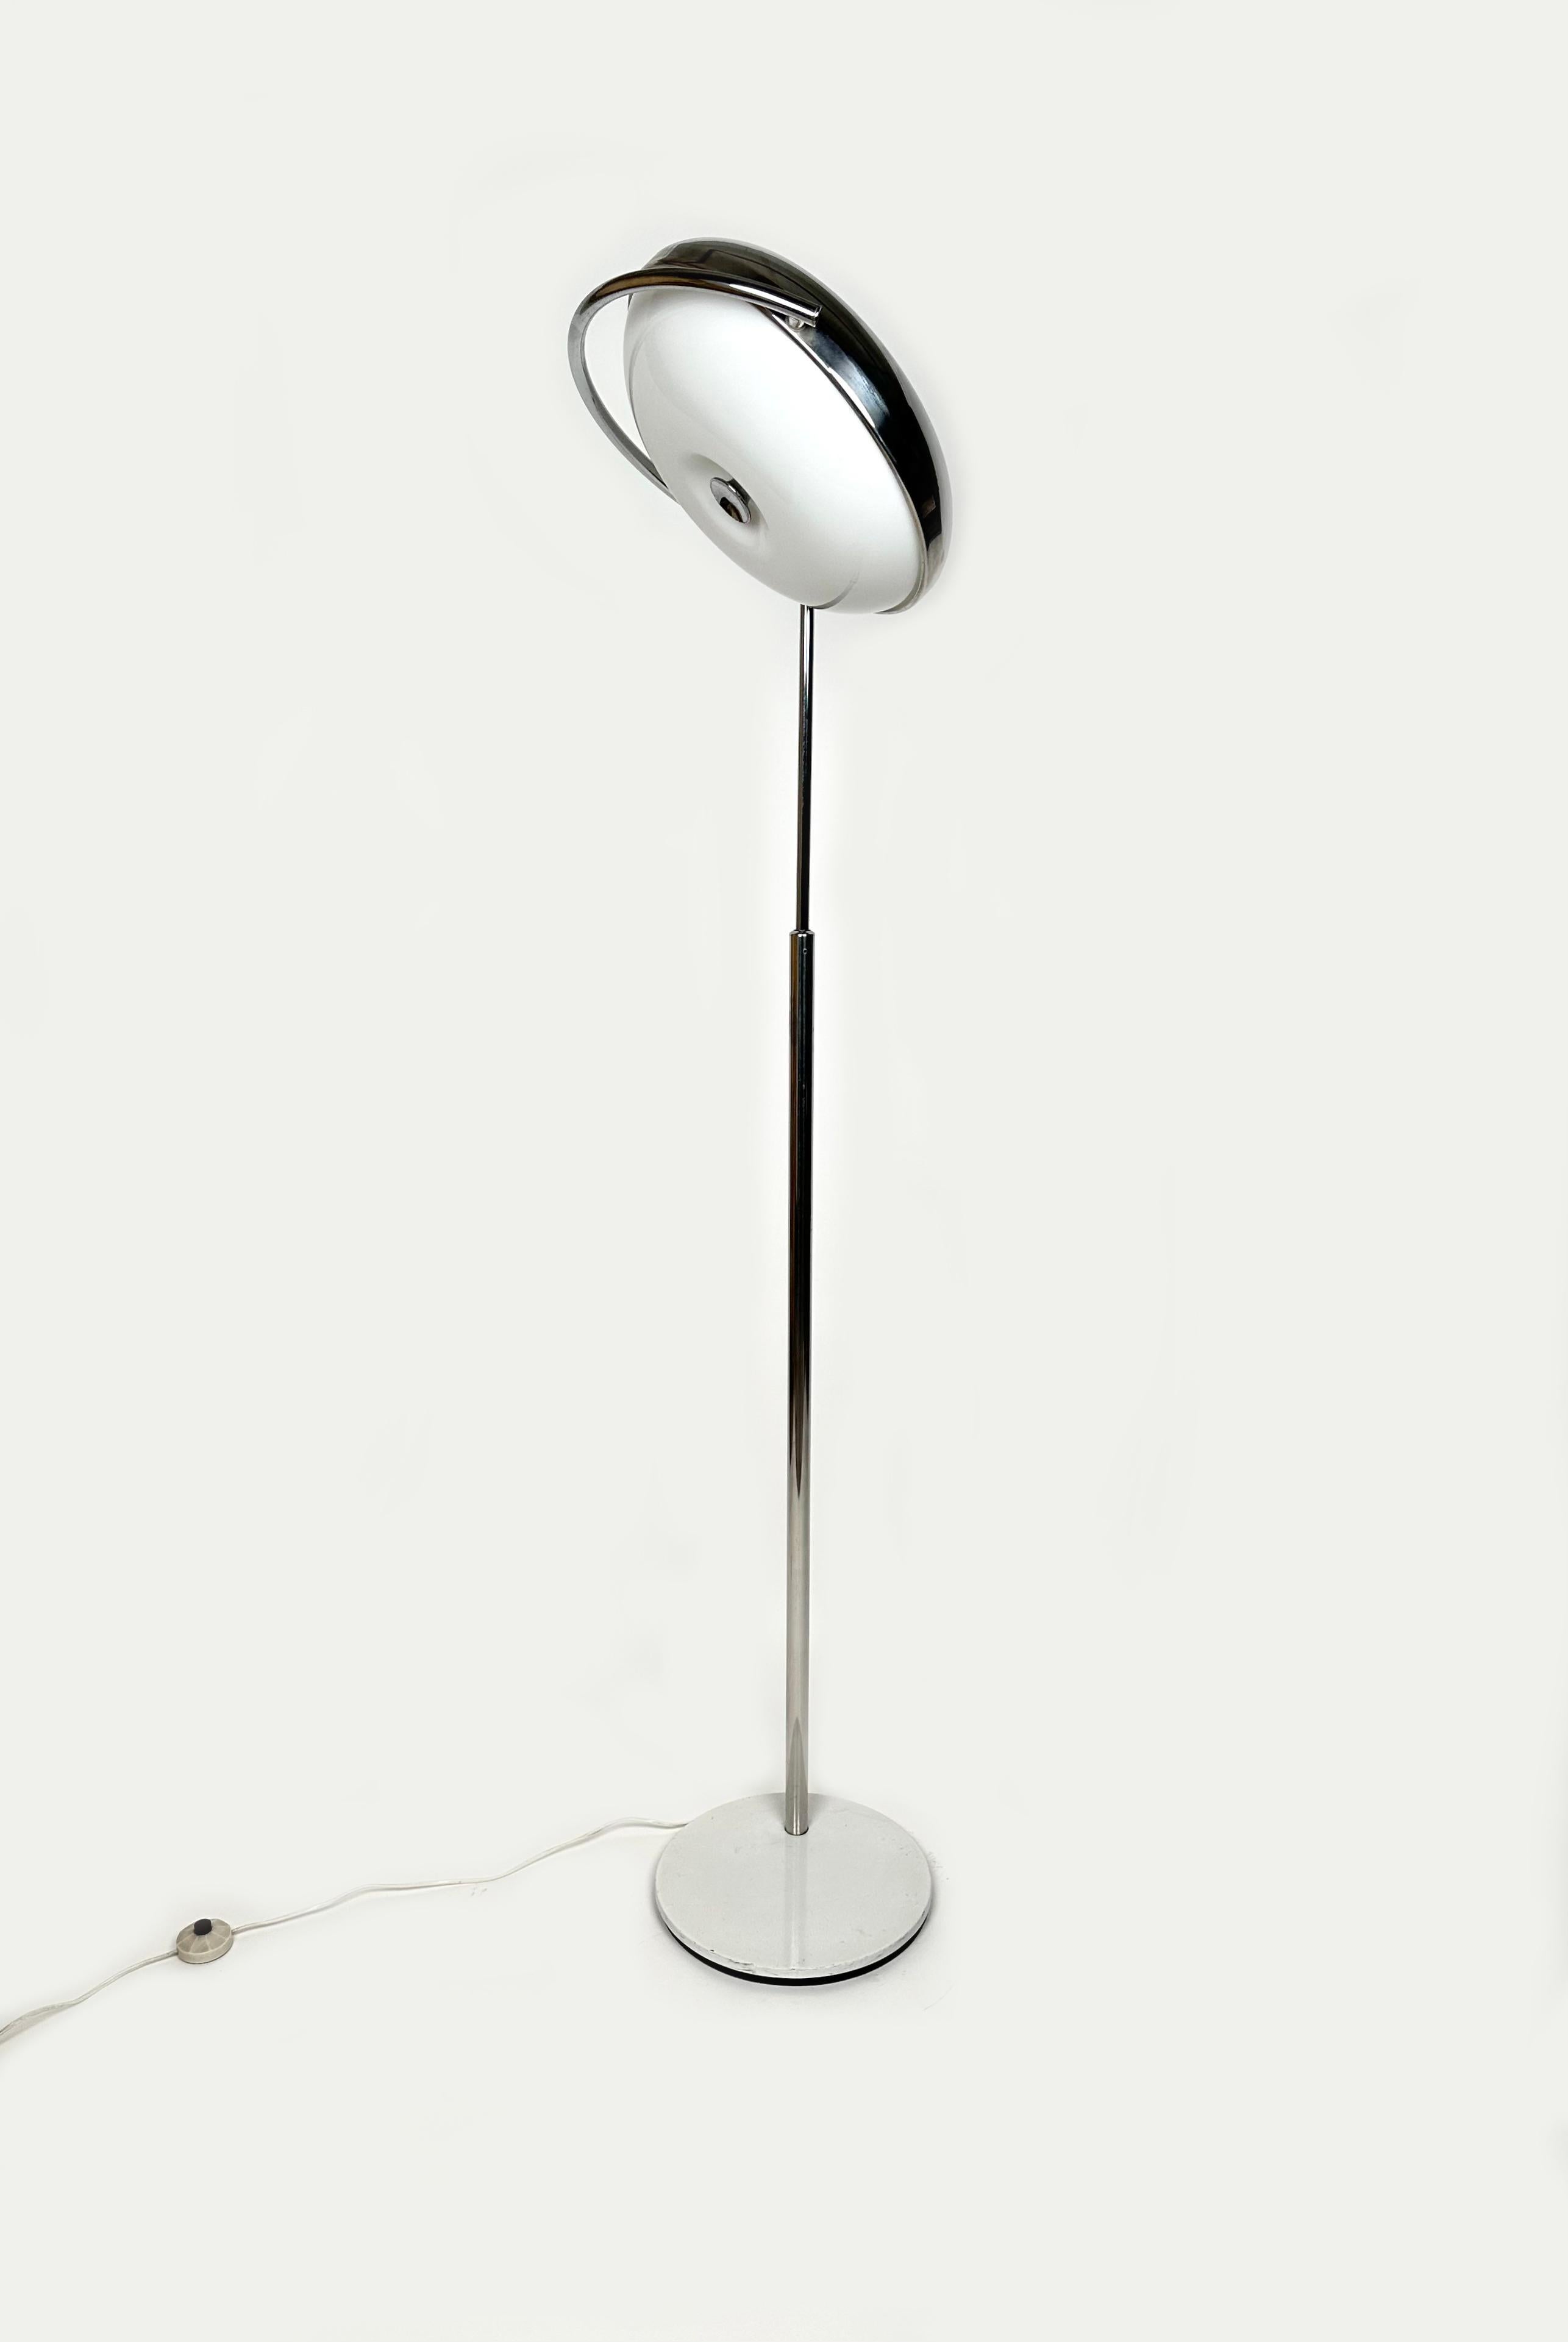 Midcentury Adjustable Floor Lamp in Chrome & Plexiglass by Reggiani, Italy 1970s In Good Condition For Sale In Rome, IT